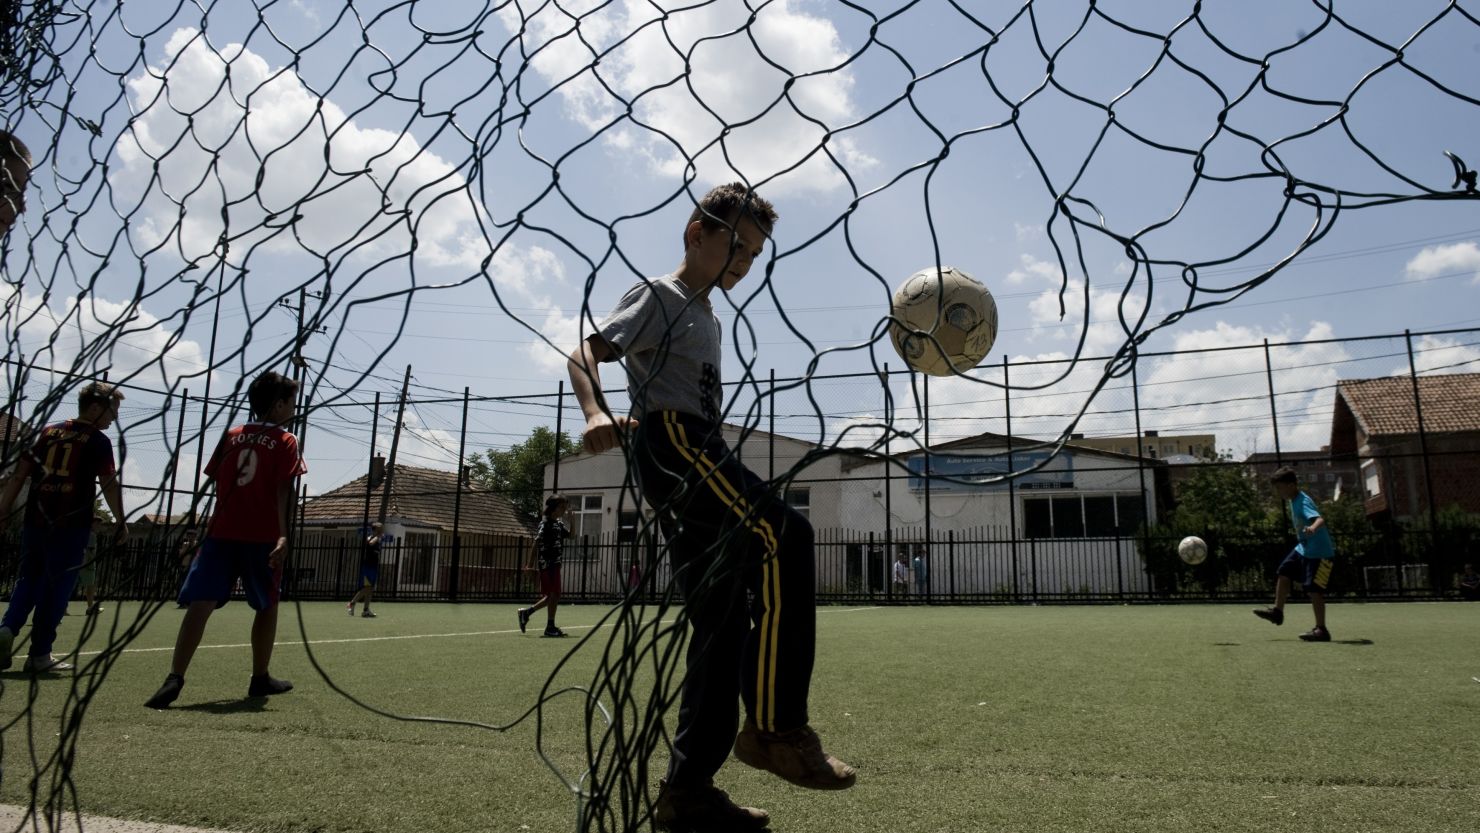 Boys enjoy playing football in Kosovo on June 29, 2014. But some parents place undue pressure on their aspiring footballers.